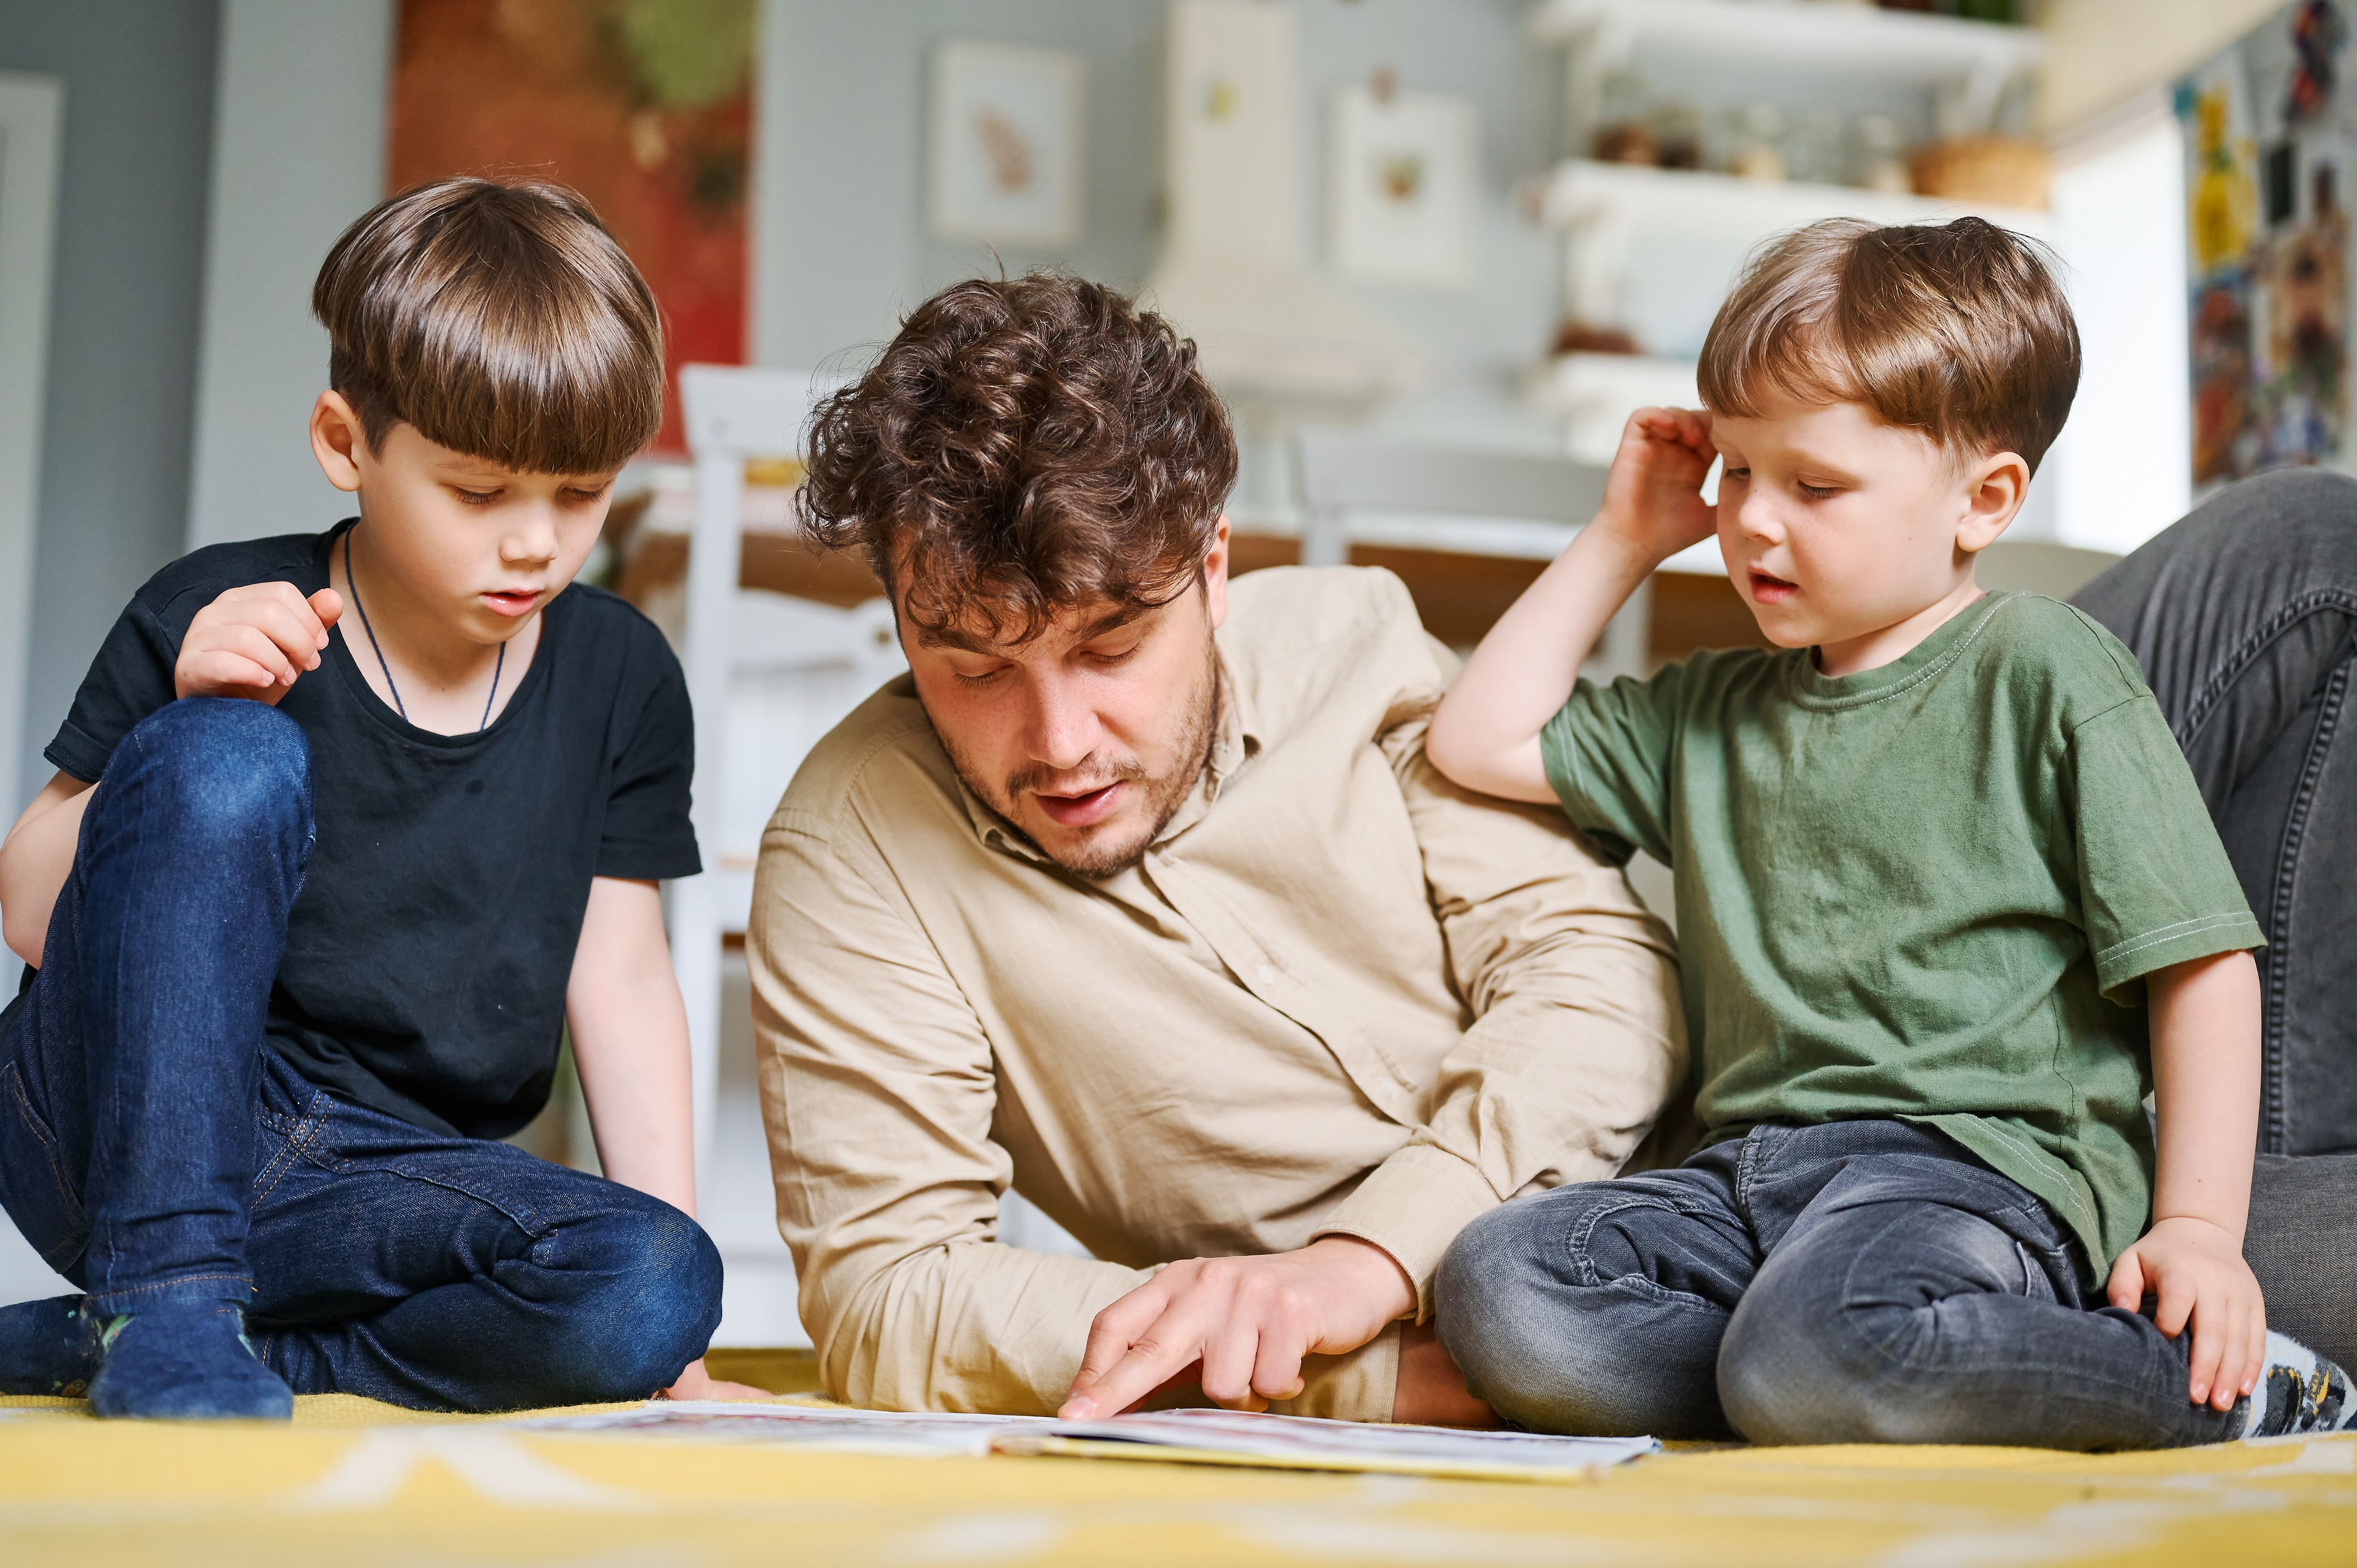 Dad and two young boys sat on a wooden floor, looking at a book together